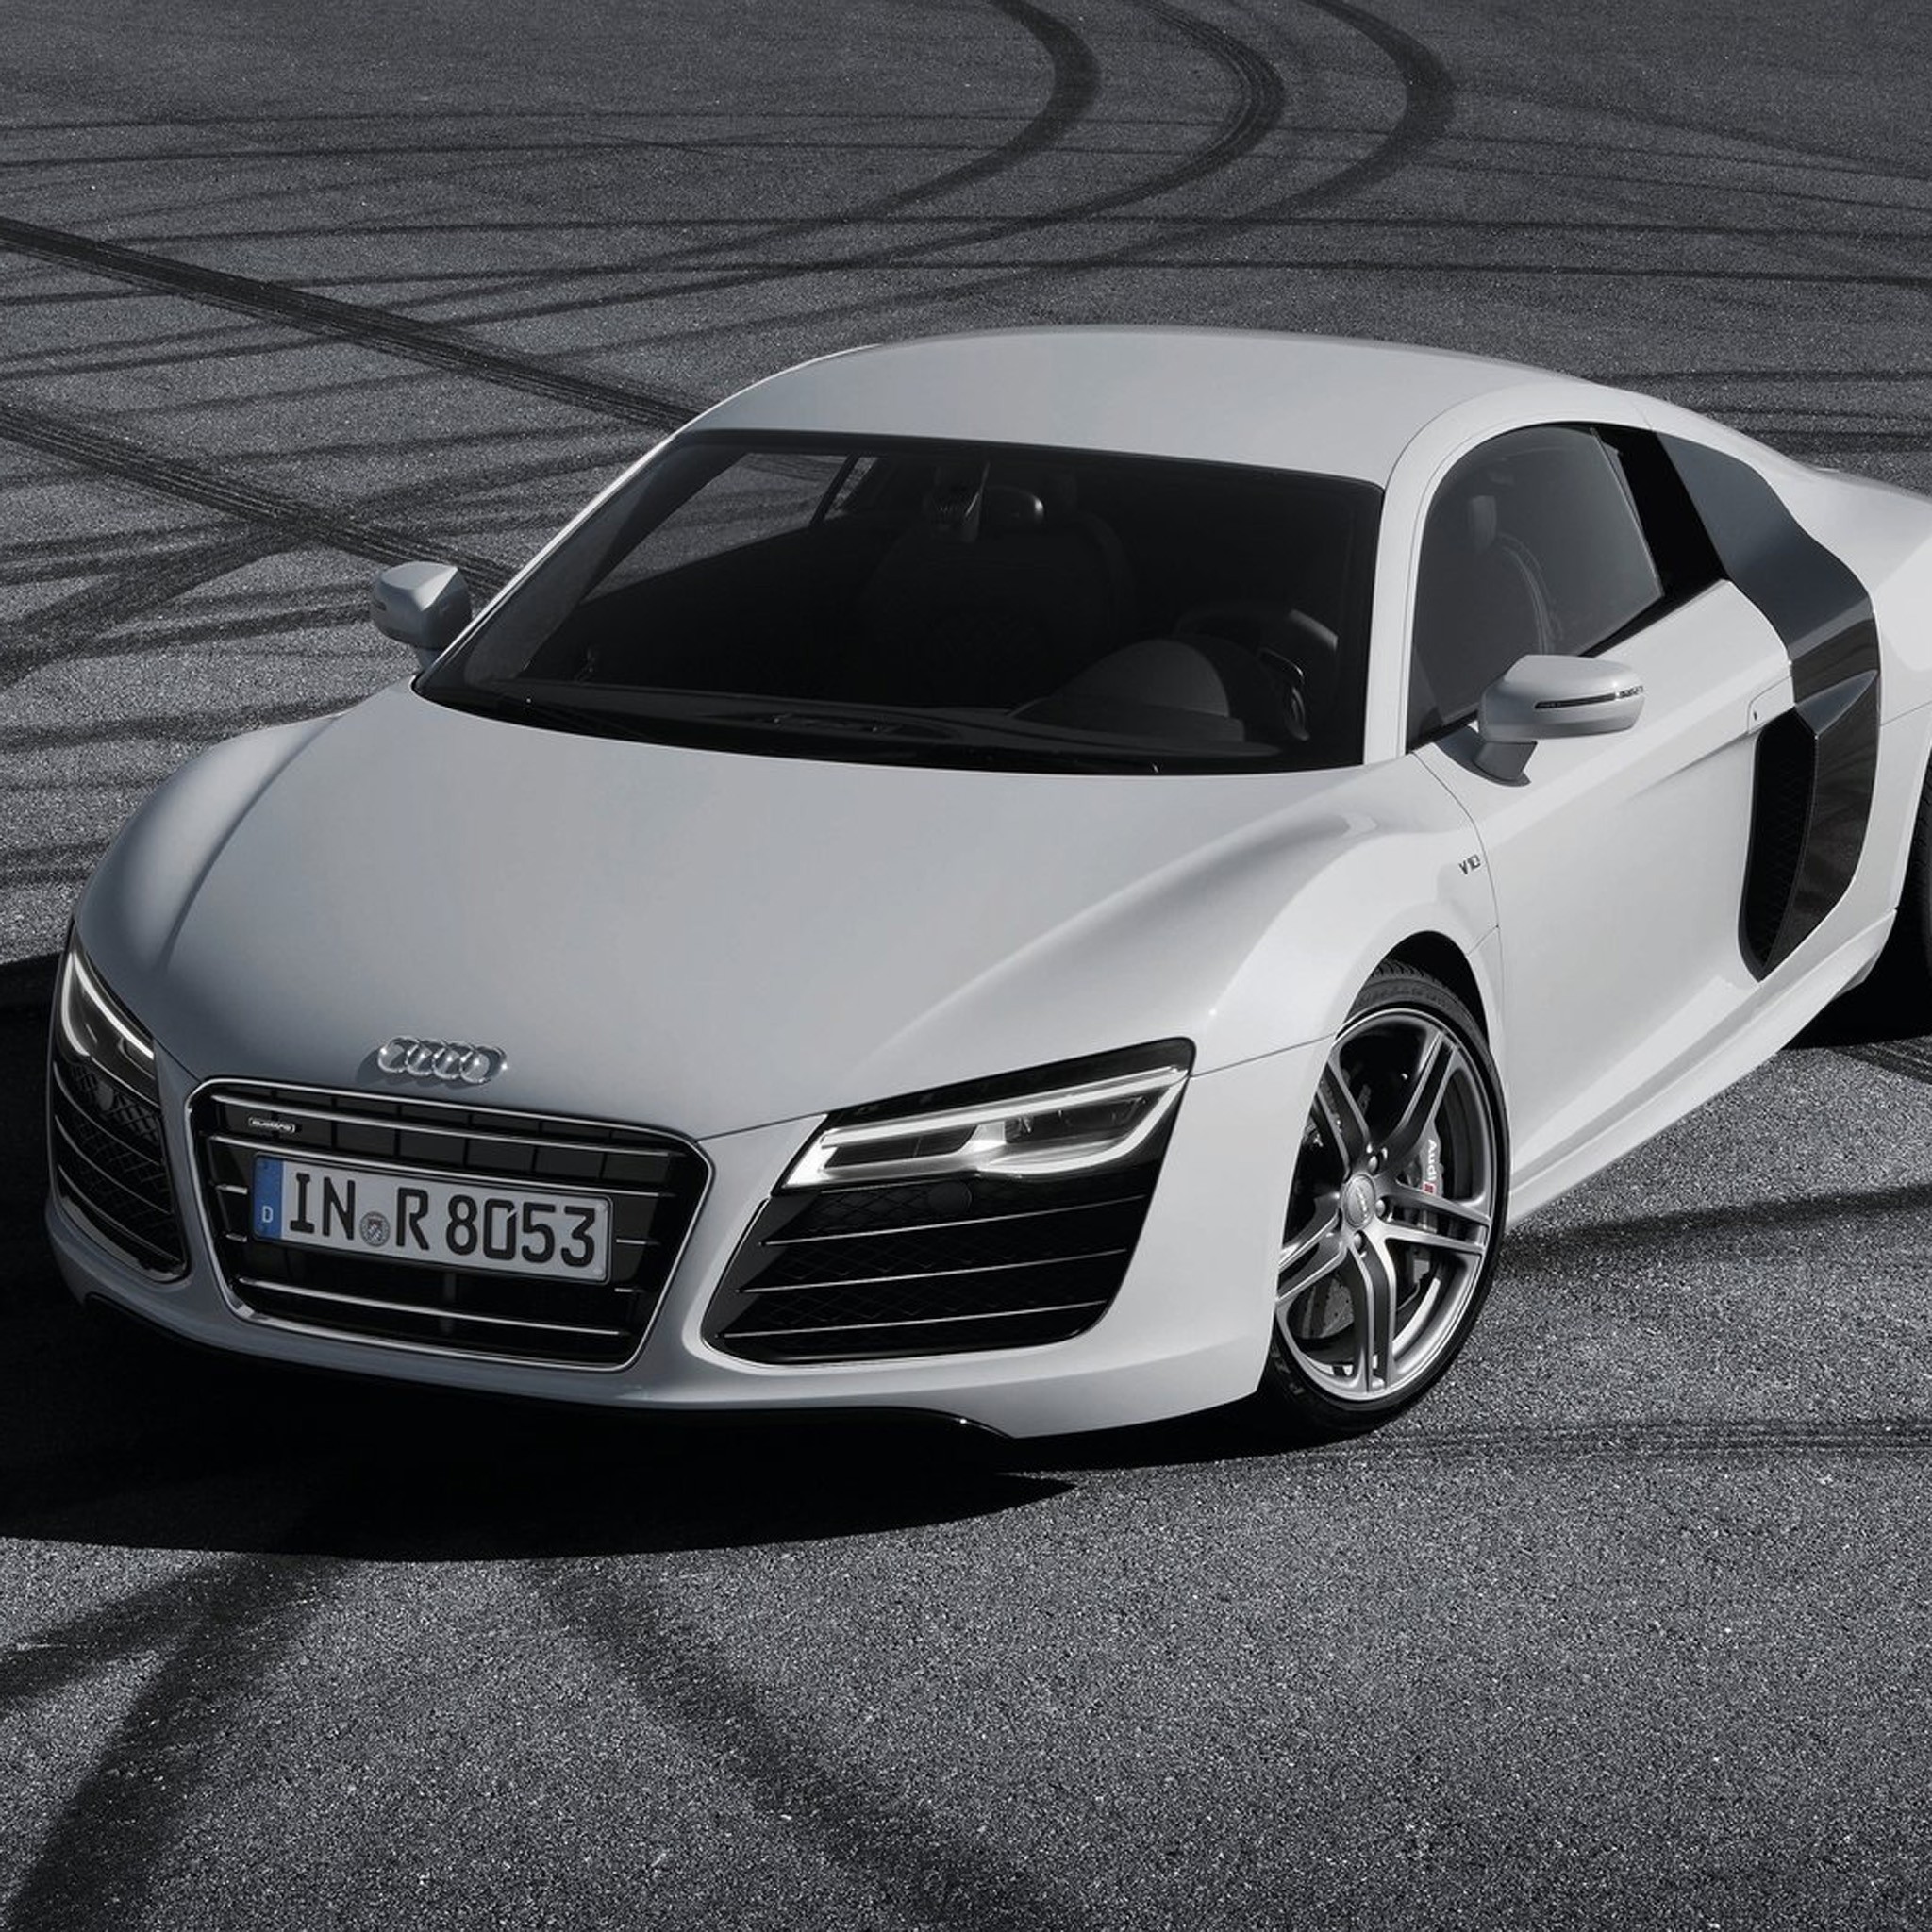 Audi R8 2013 Black Wallpaper For Iphone HD Iphone Black and Cool